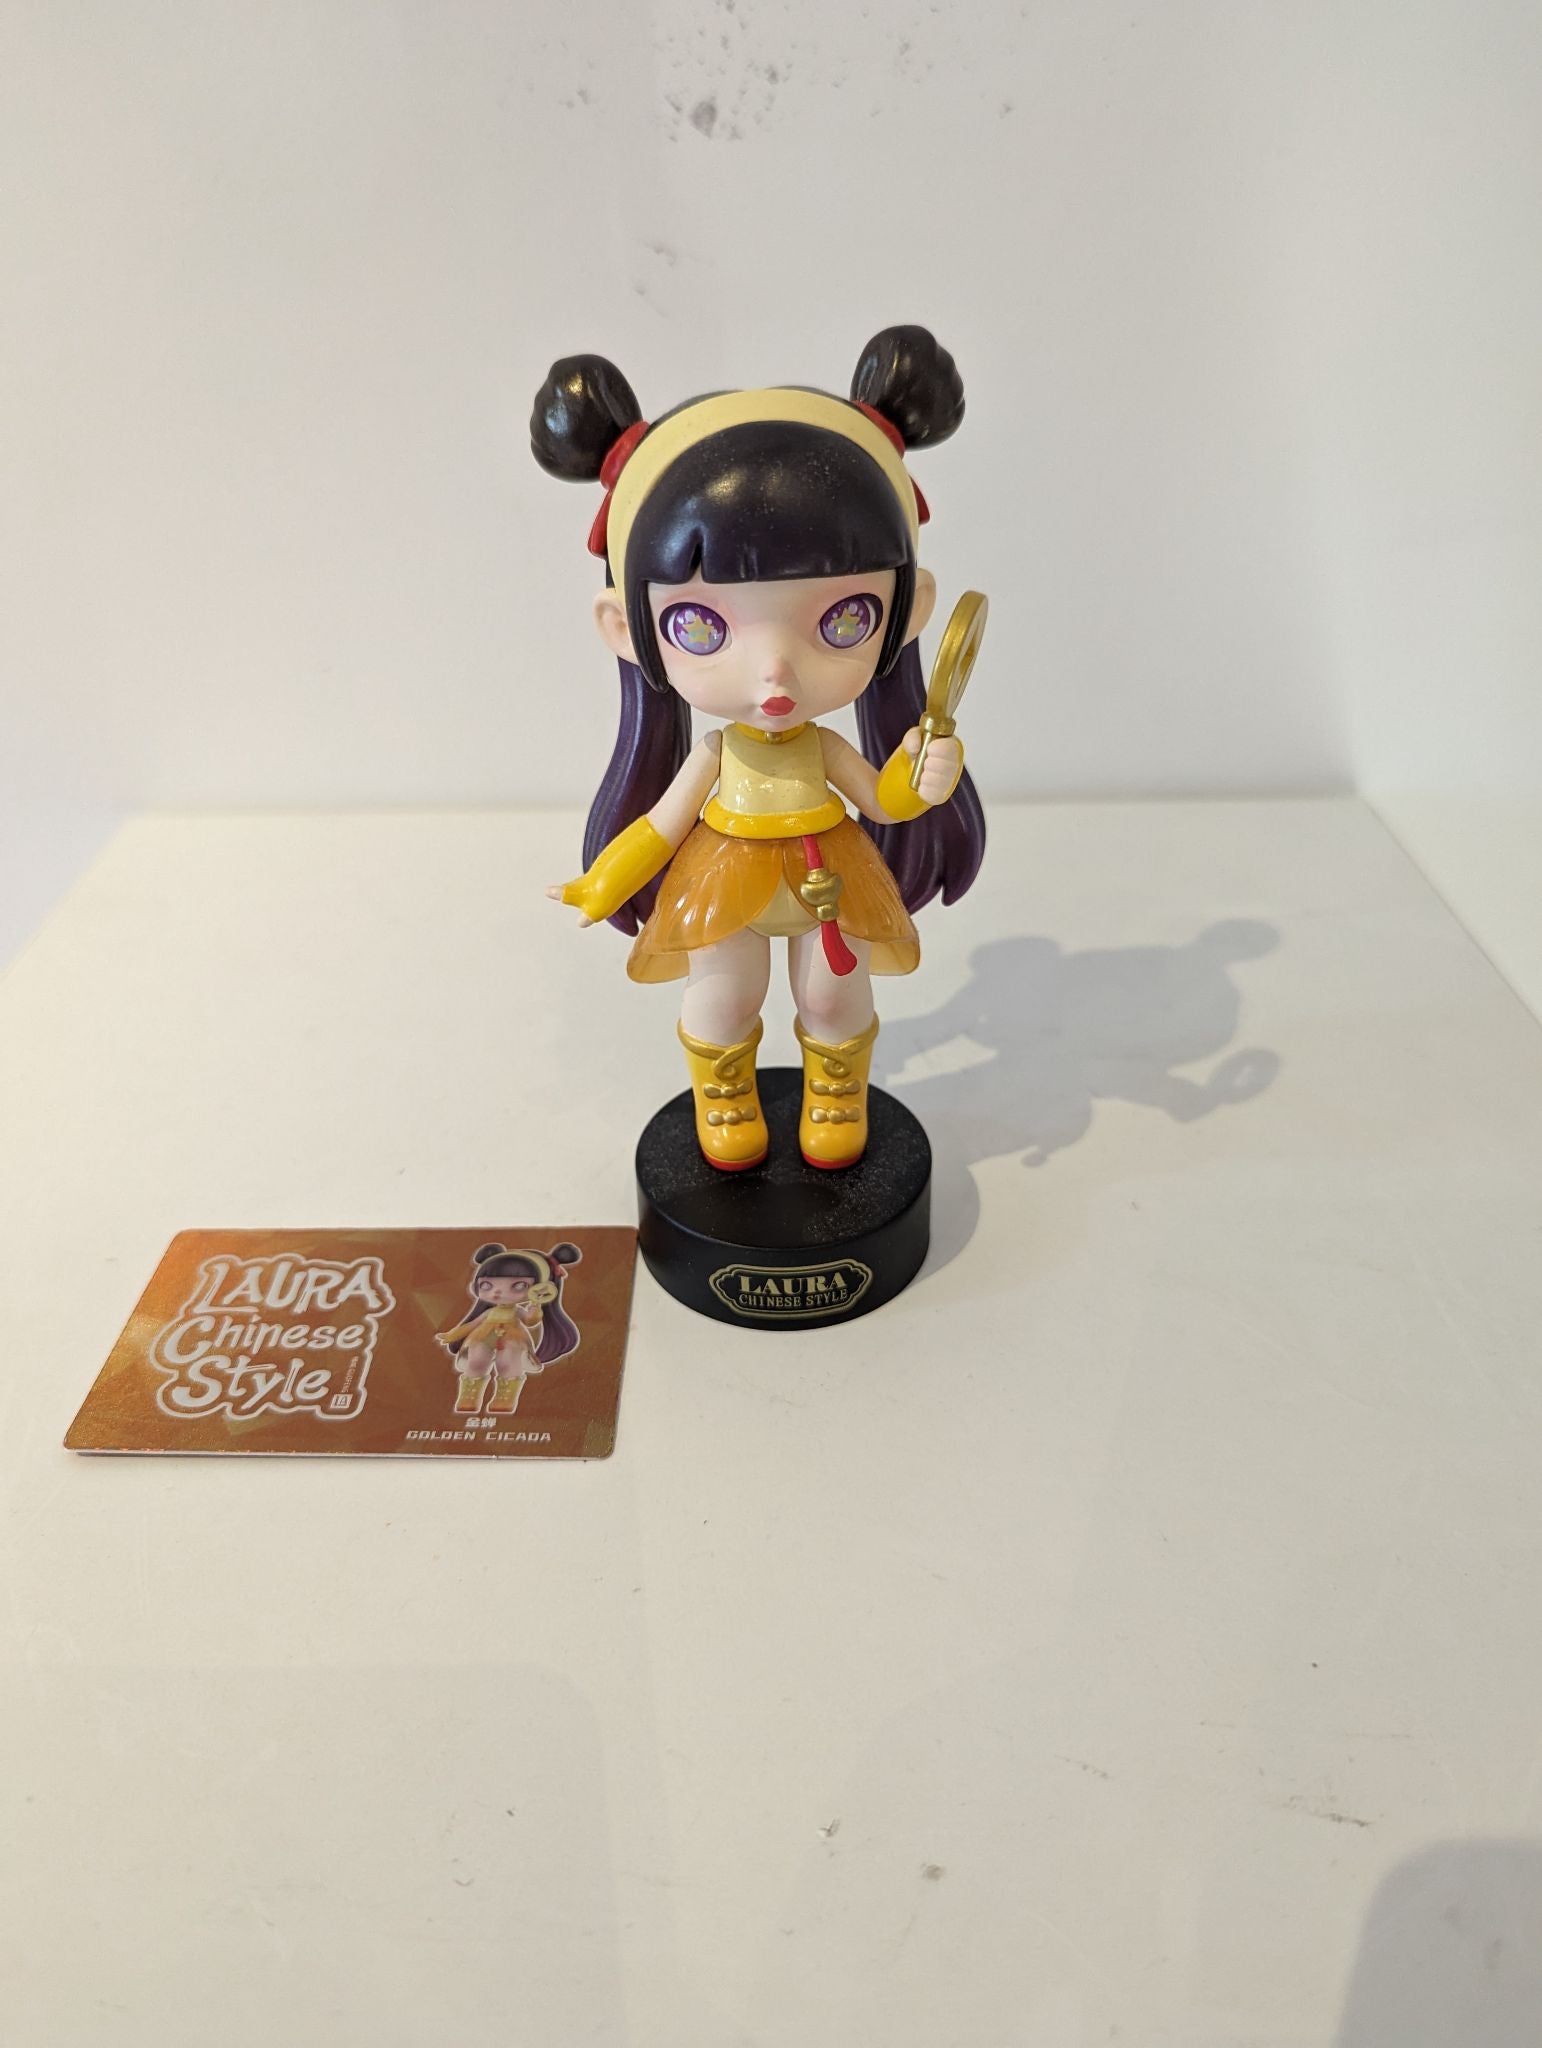 LAURA - Chinese Style - Token Toys - 2